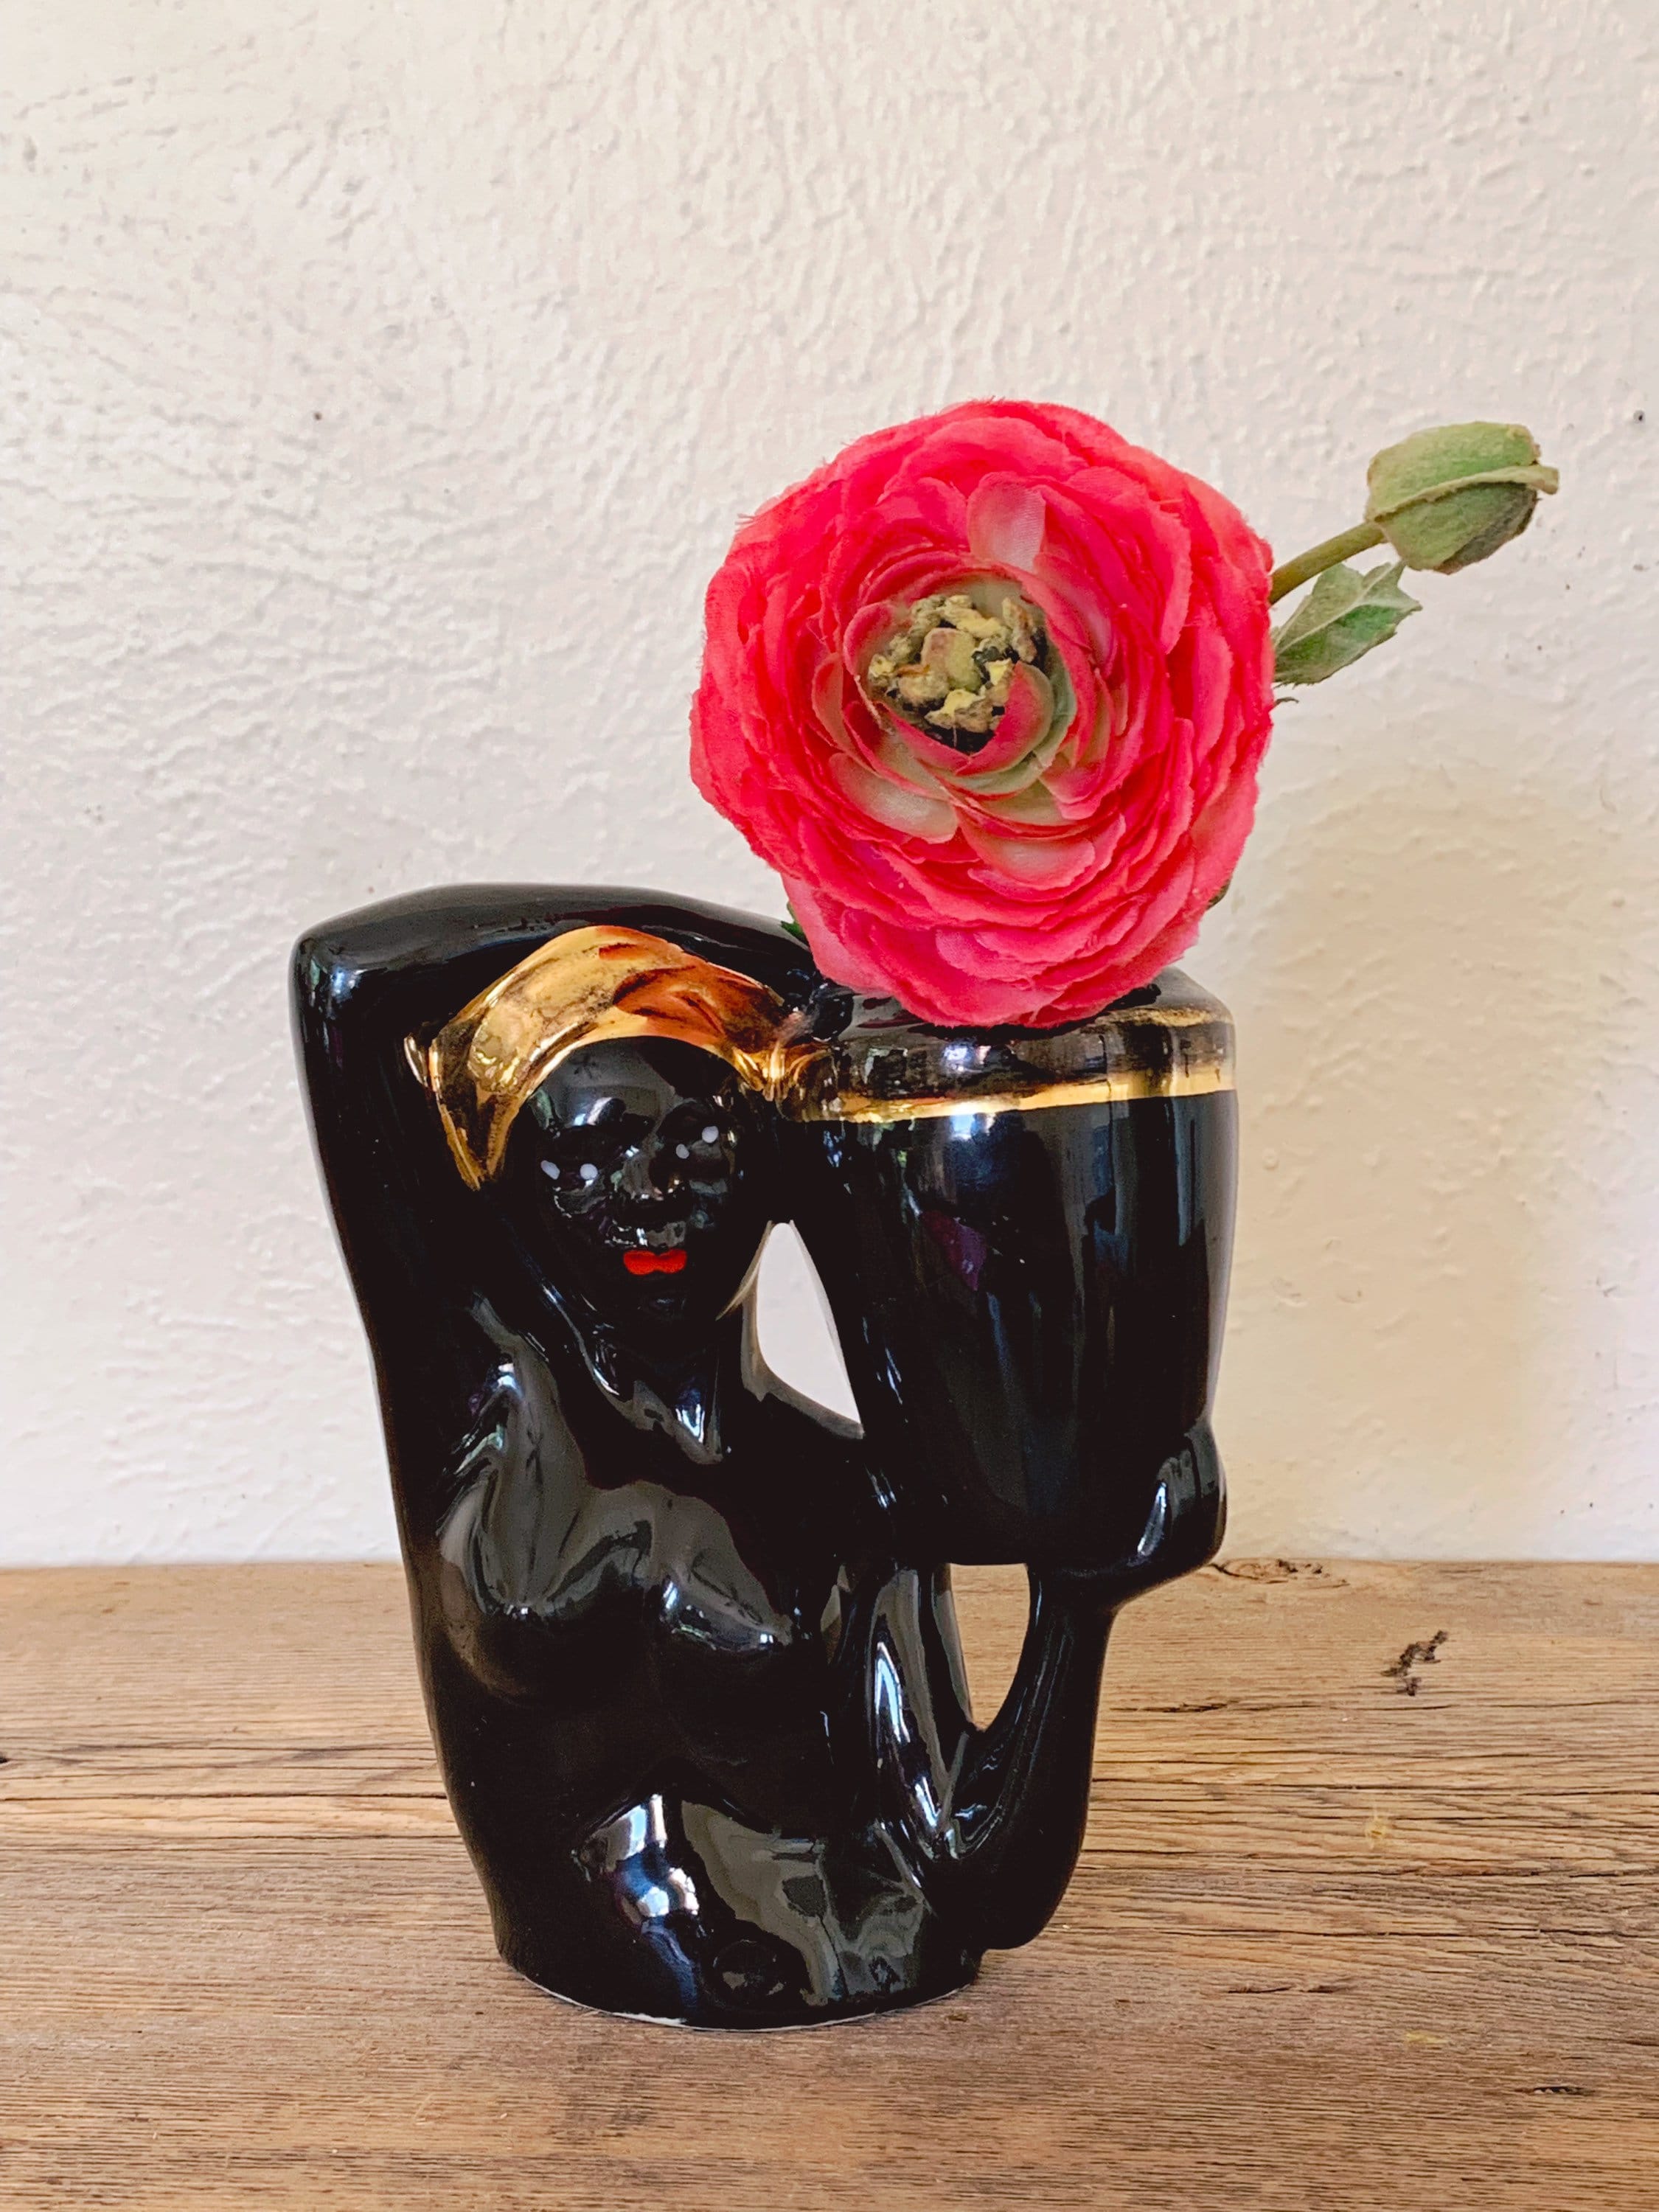 Vintage Mid-Century Black Ceramic African Girl with Water Jug Vase | Black and Gold Woman Torso Sculpture | Home Decor | Gift for Her